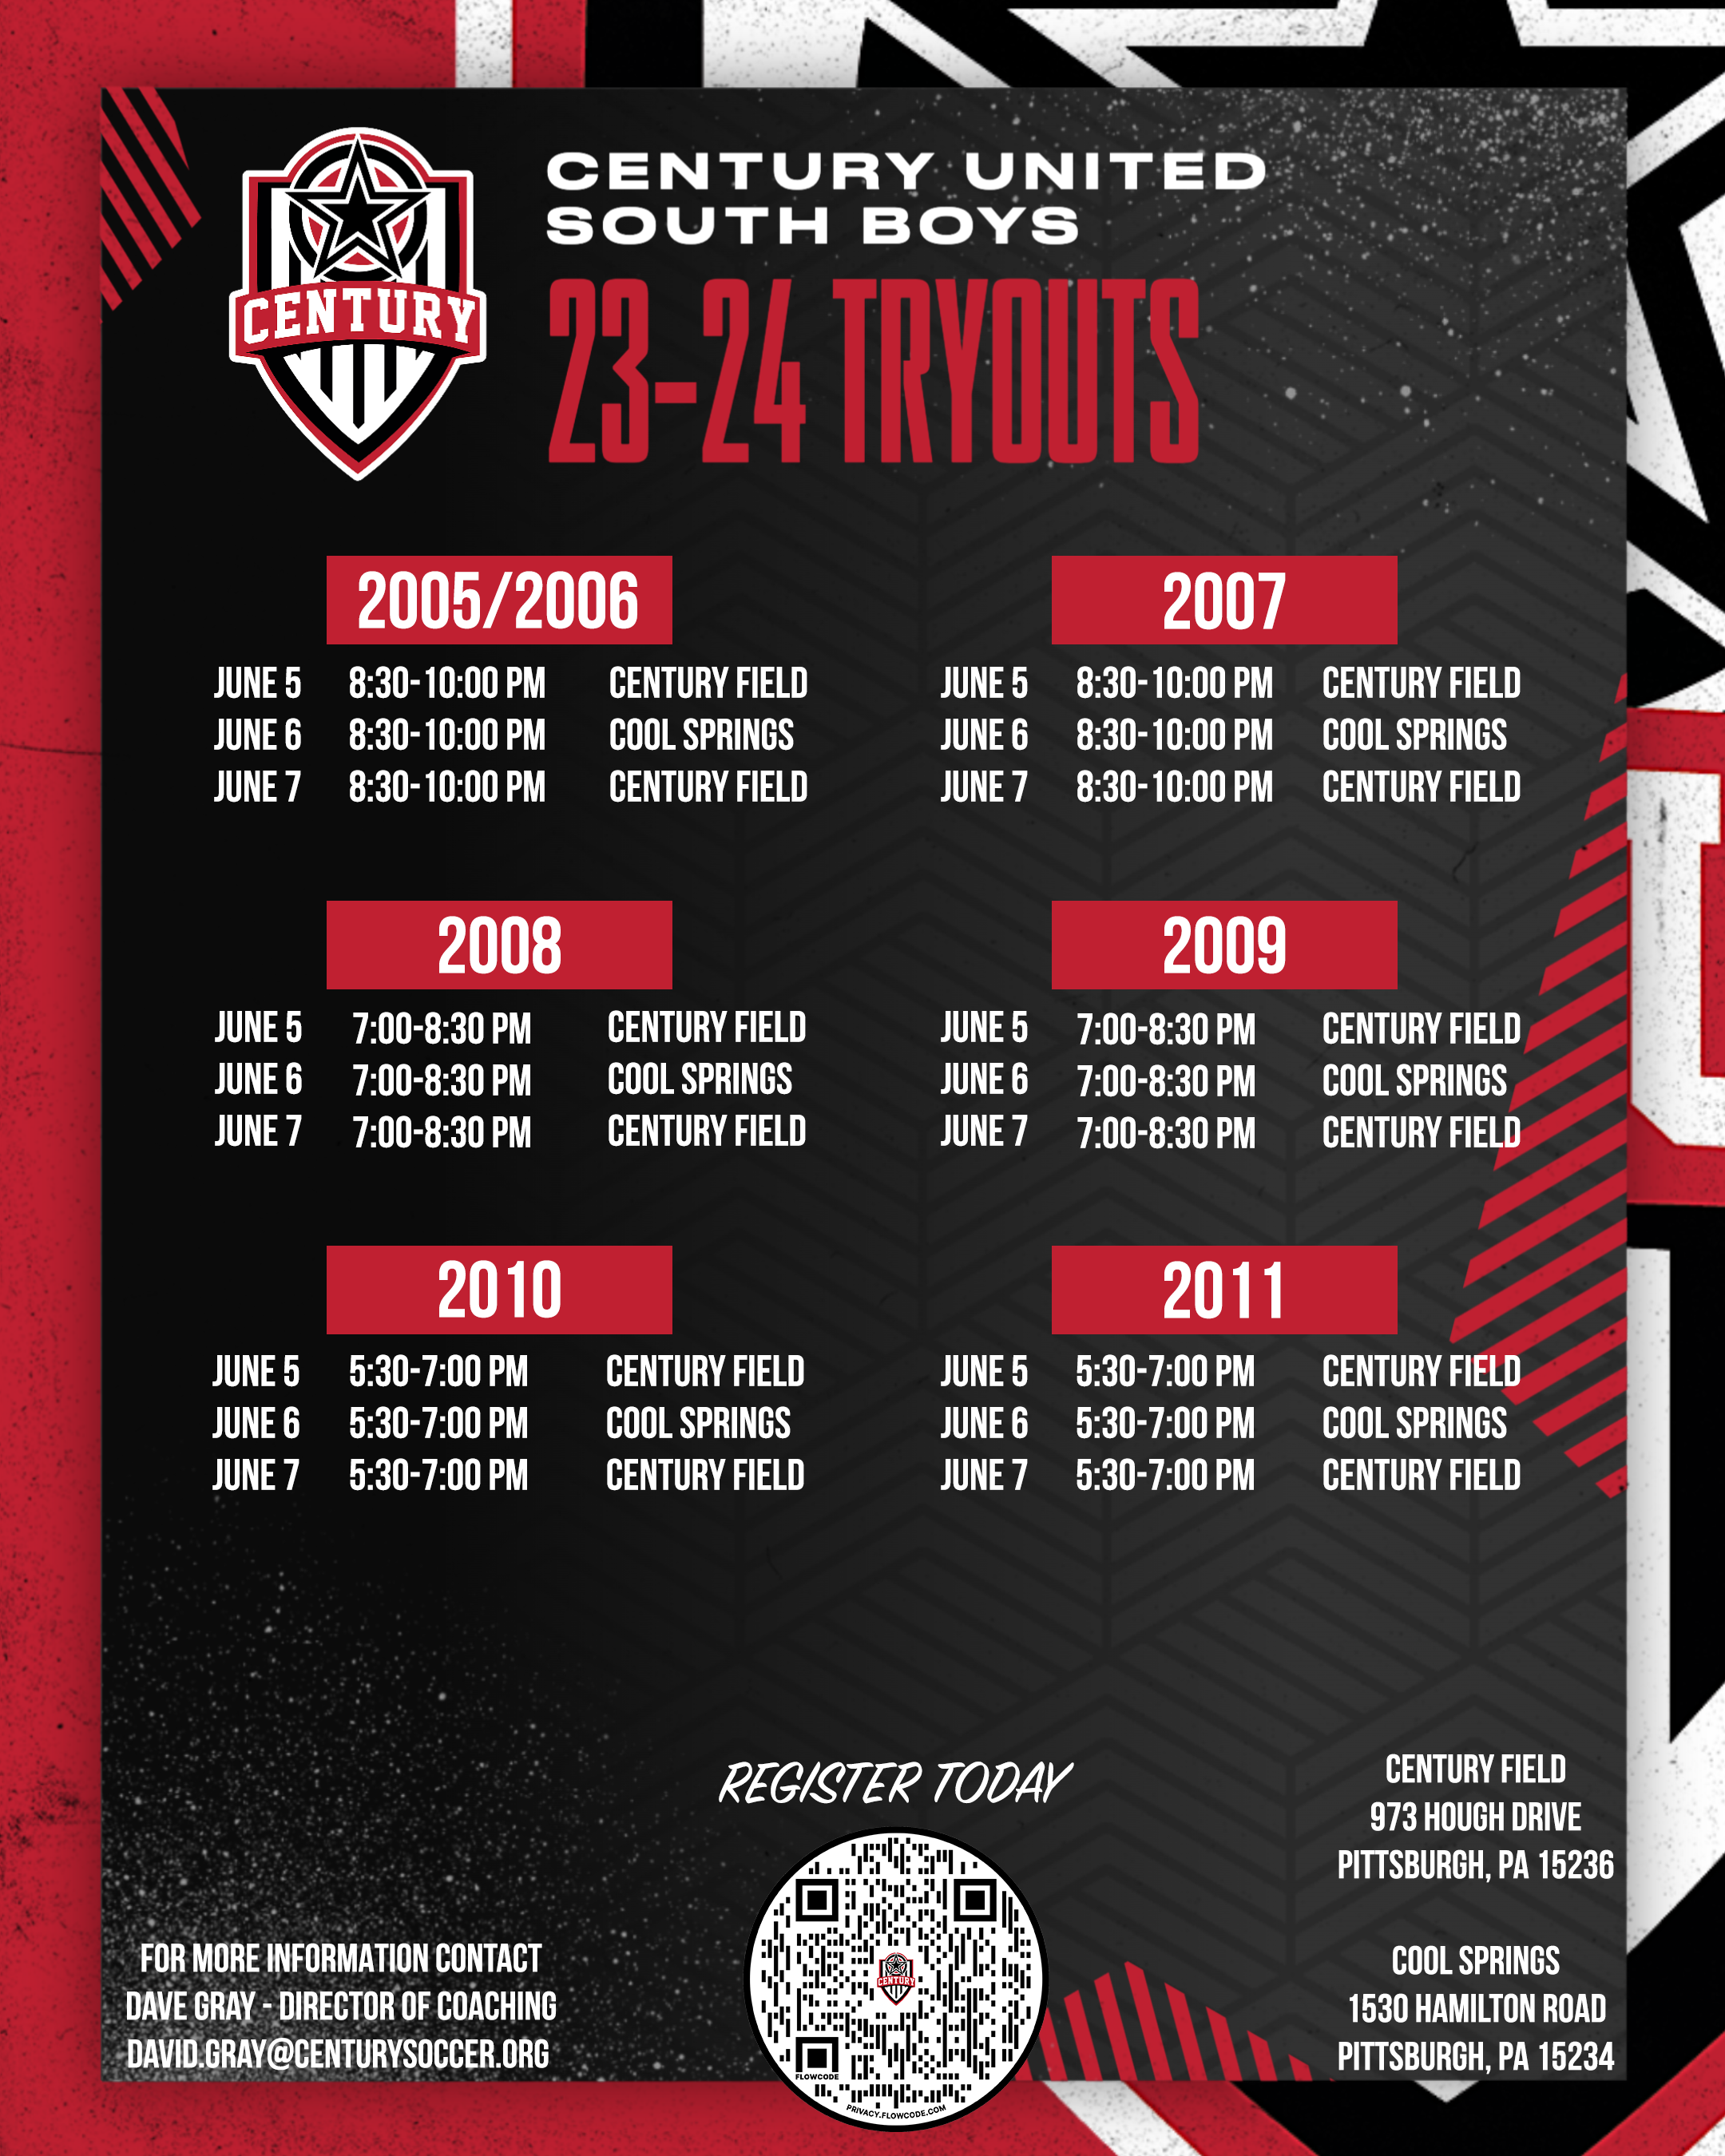 Century United South Boys Tryout Schedule